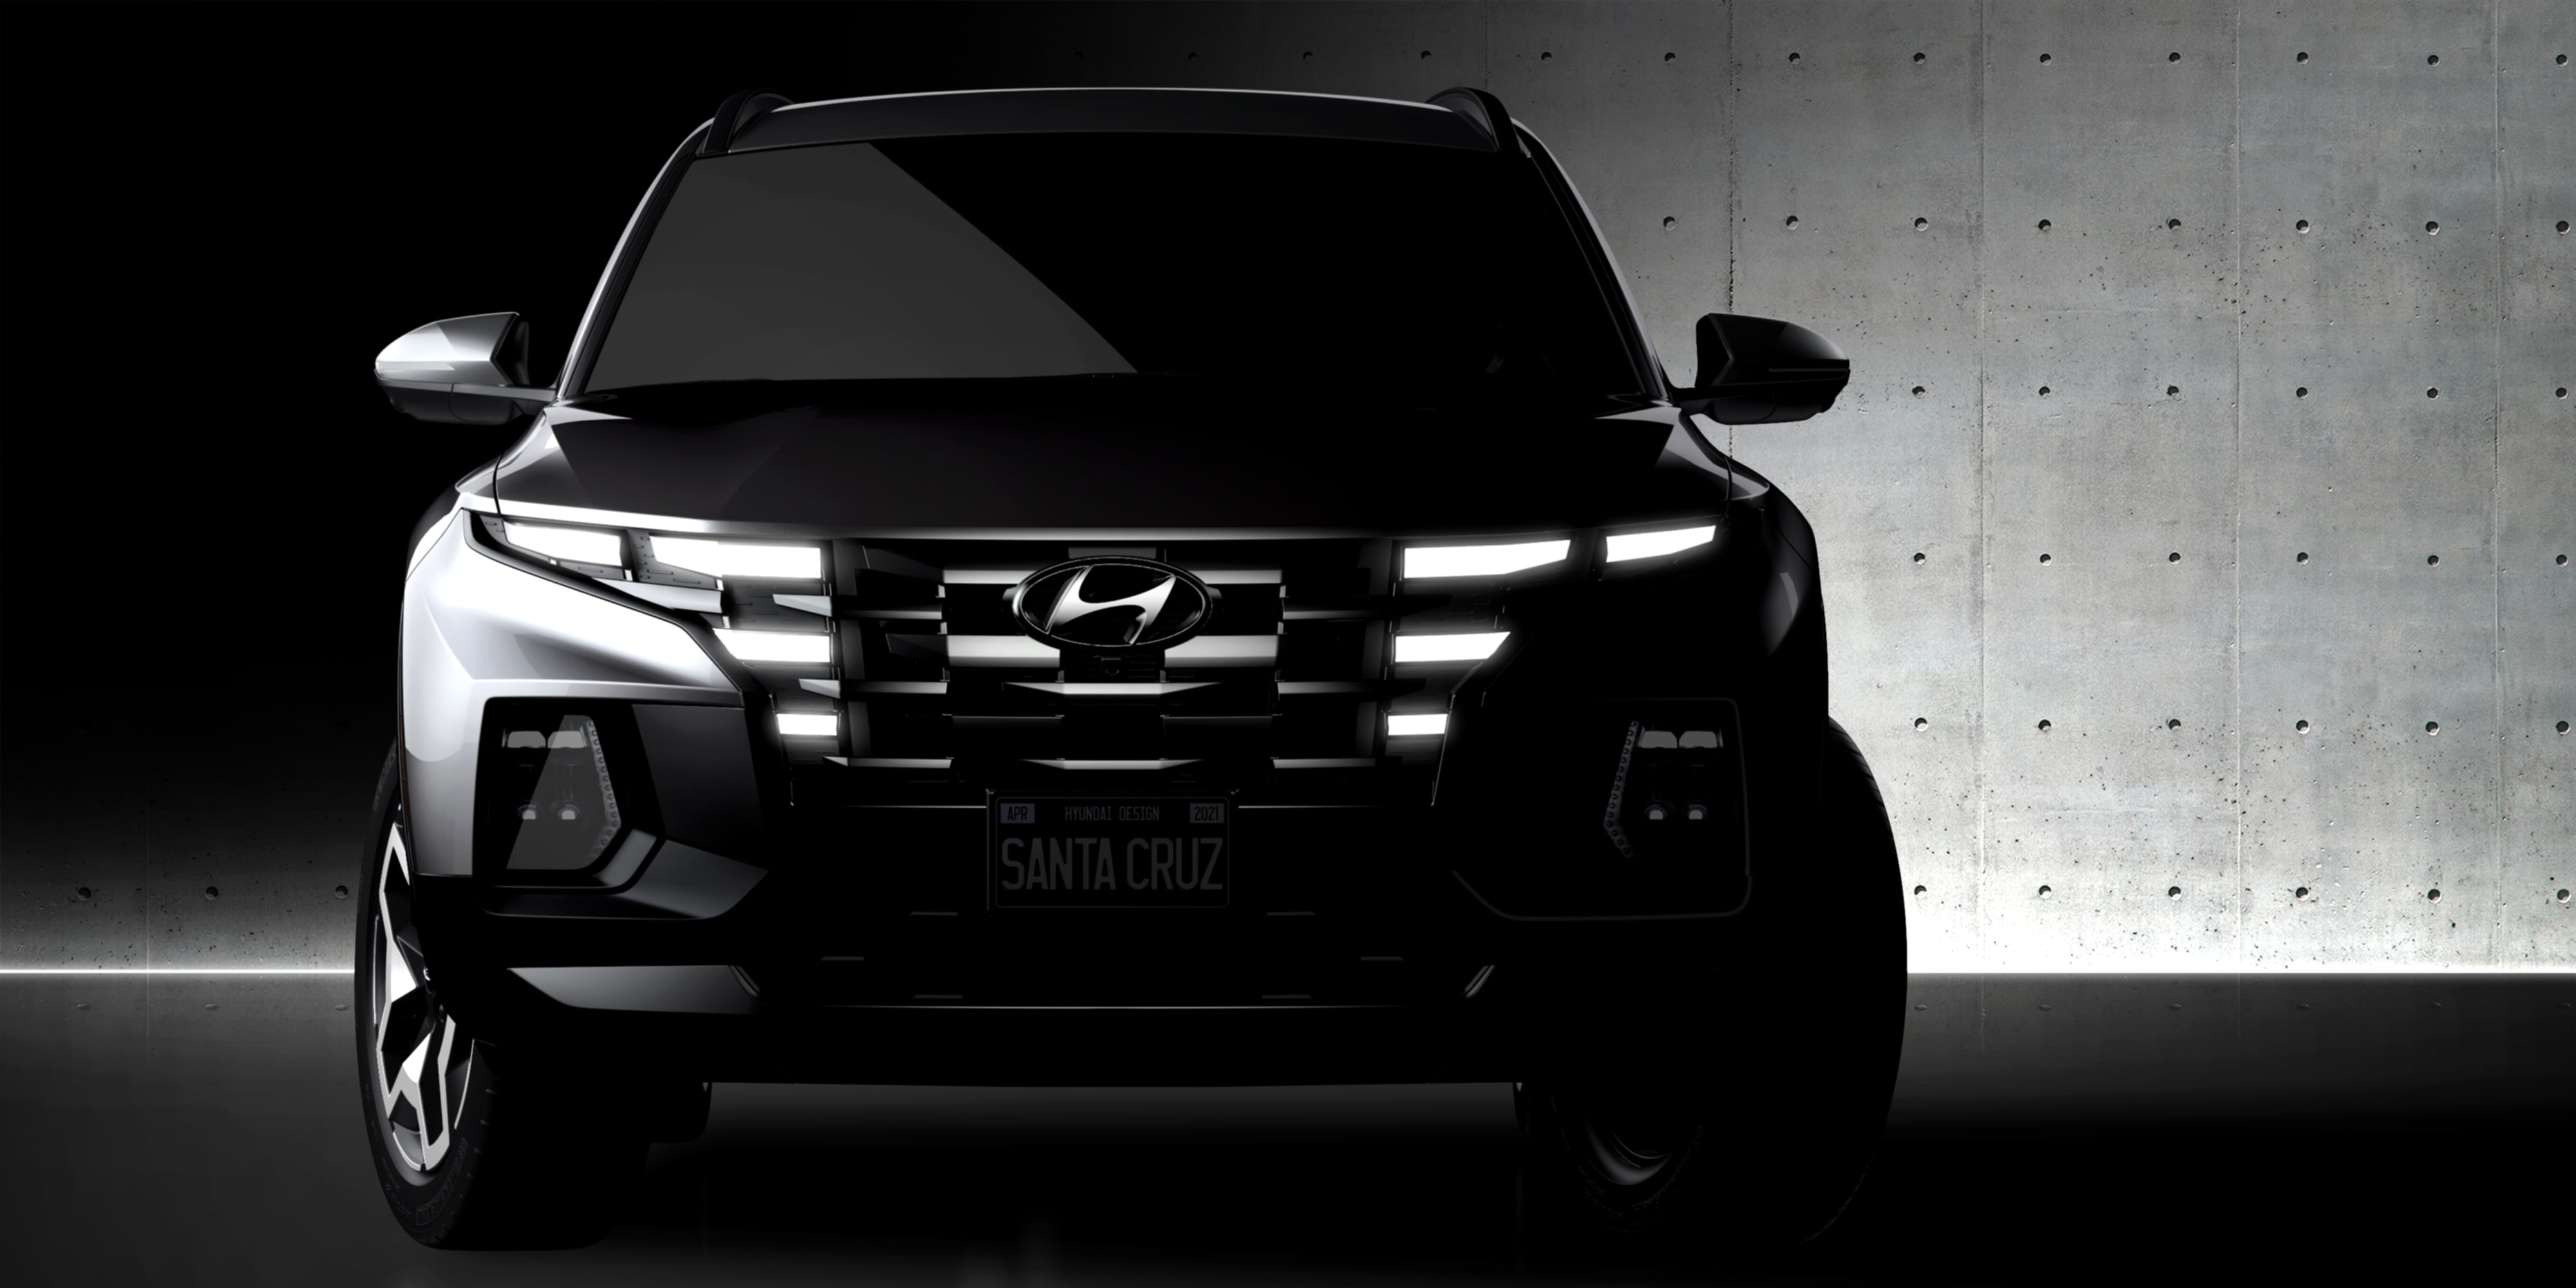 Santa Cruz from Hyundai promises to add a whole lot of style to the otherwise muscular visual profile of pickup trucks.